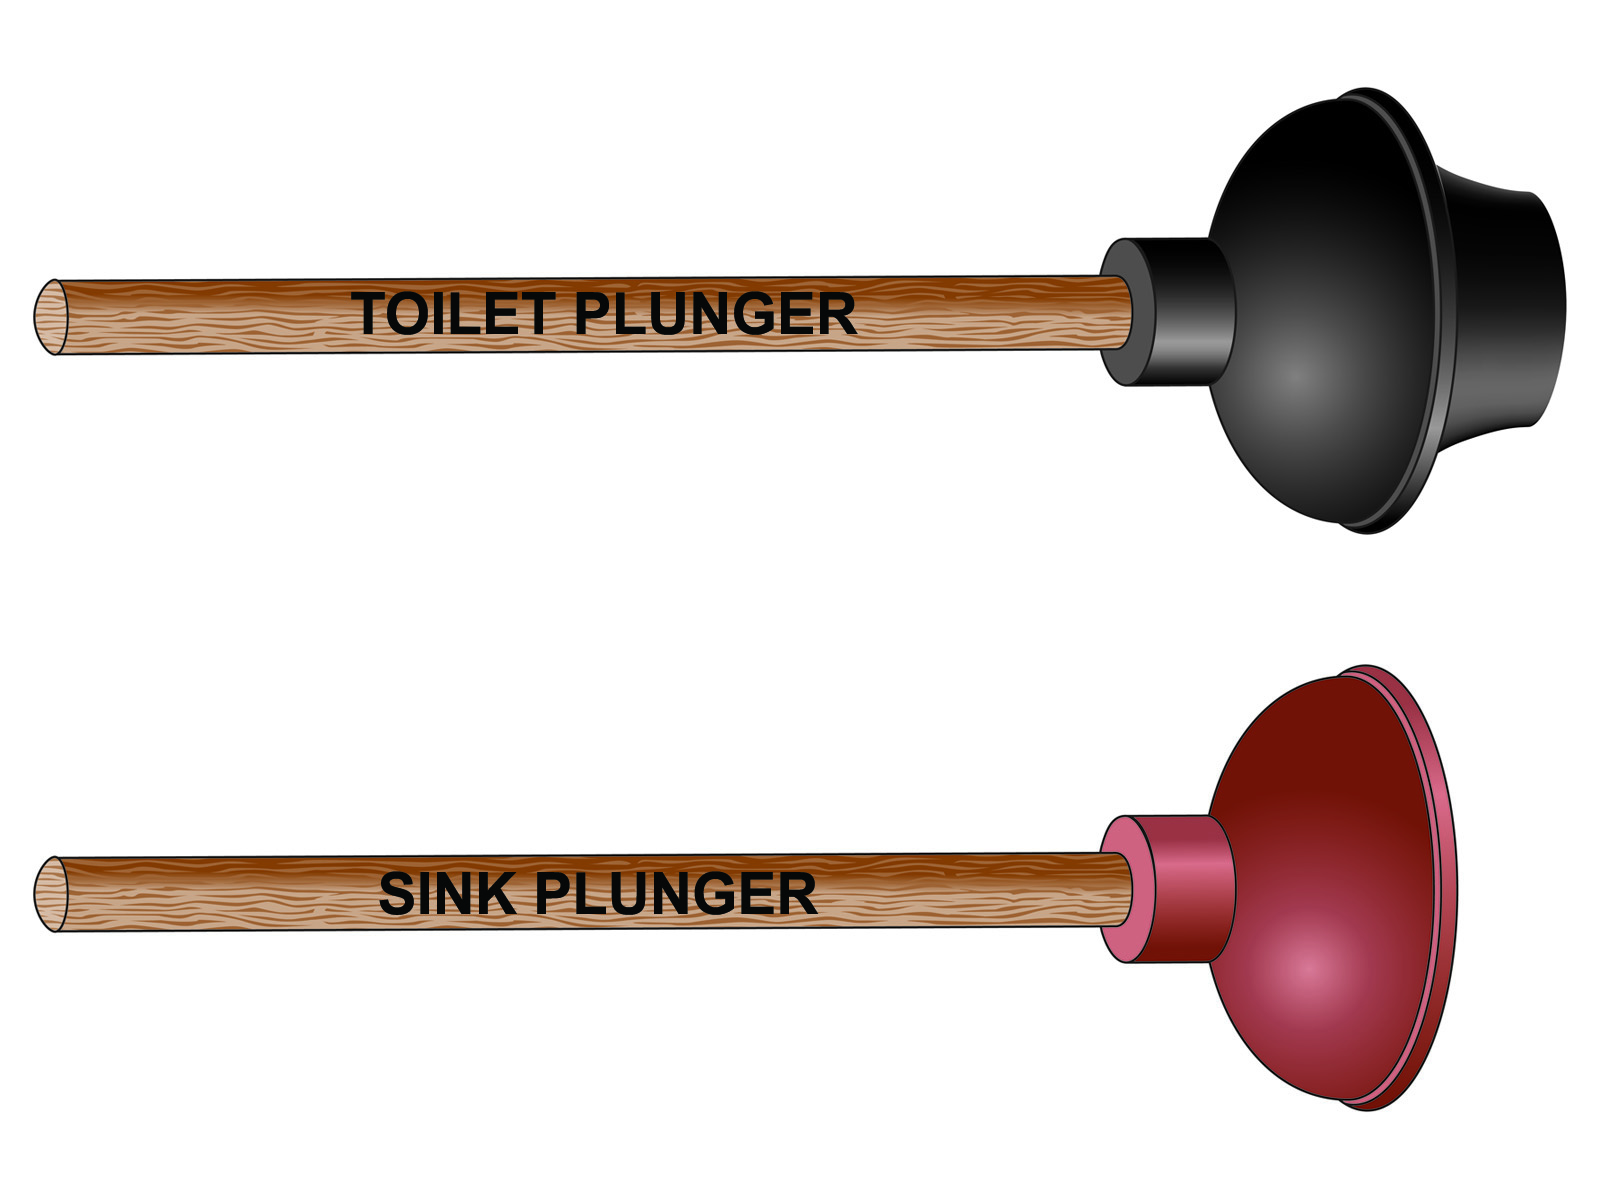 A toilet plunger and a sink plunger.